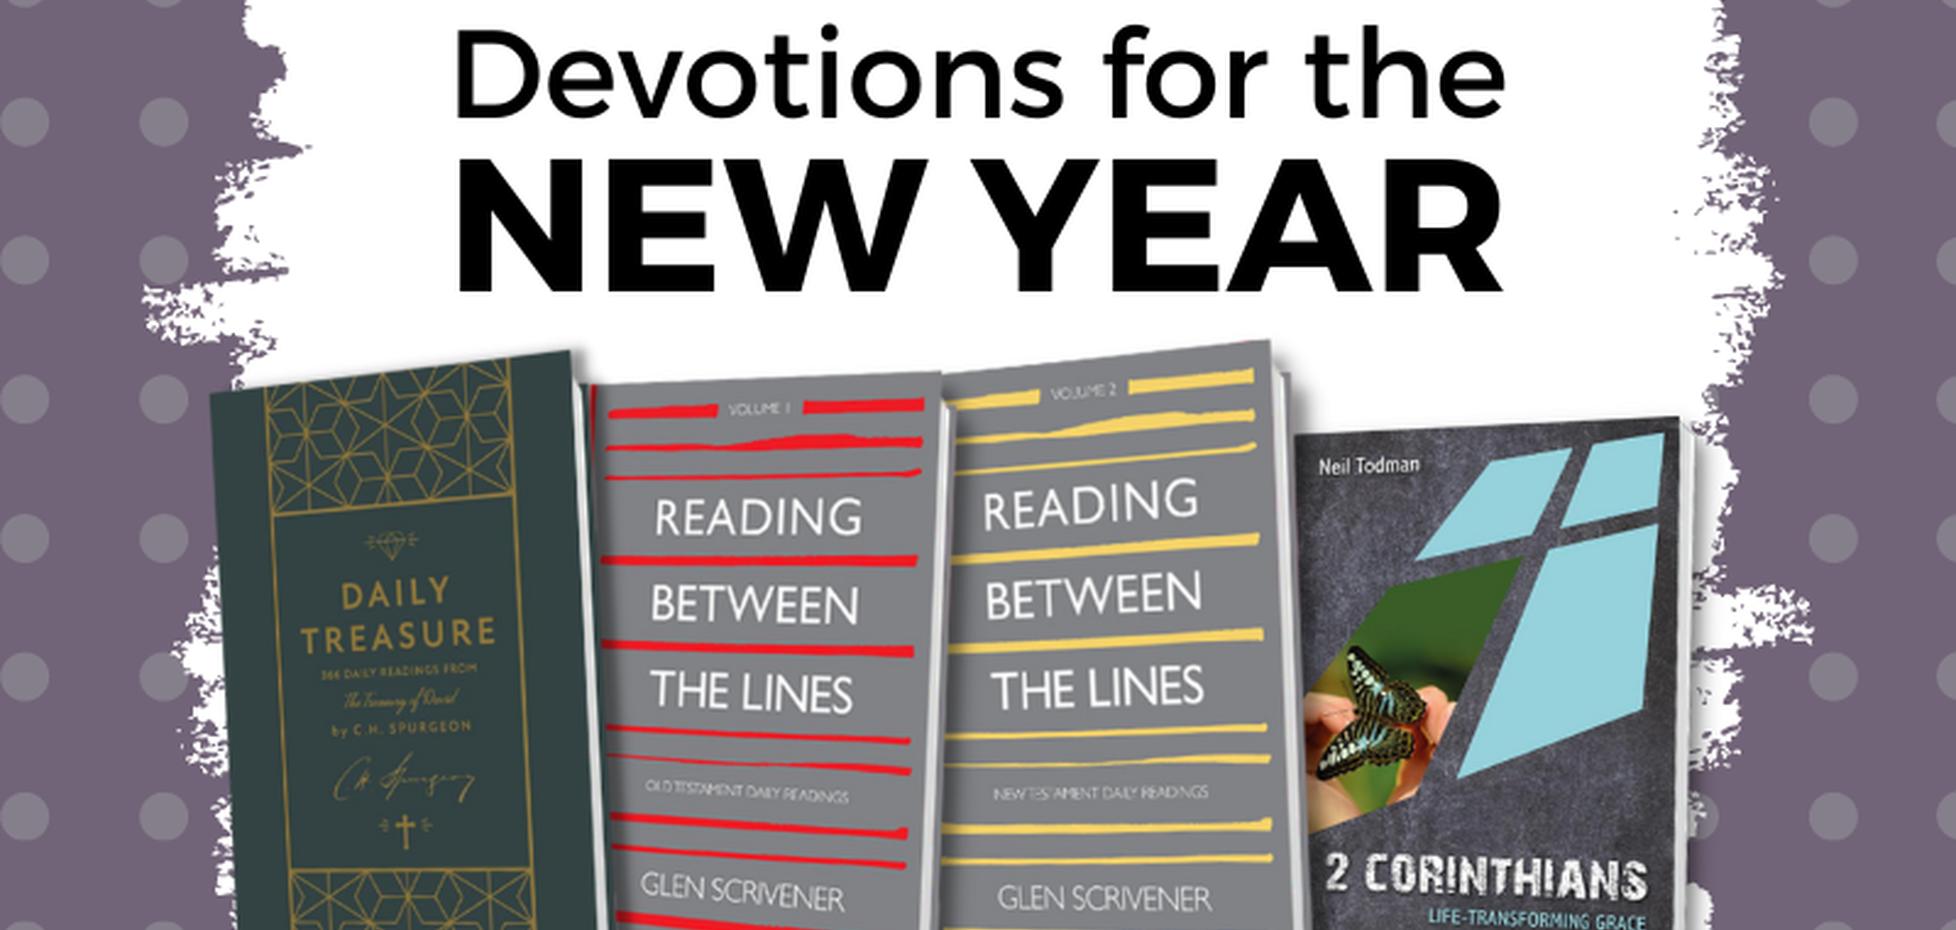 Devotions for the New Year